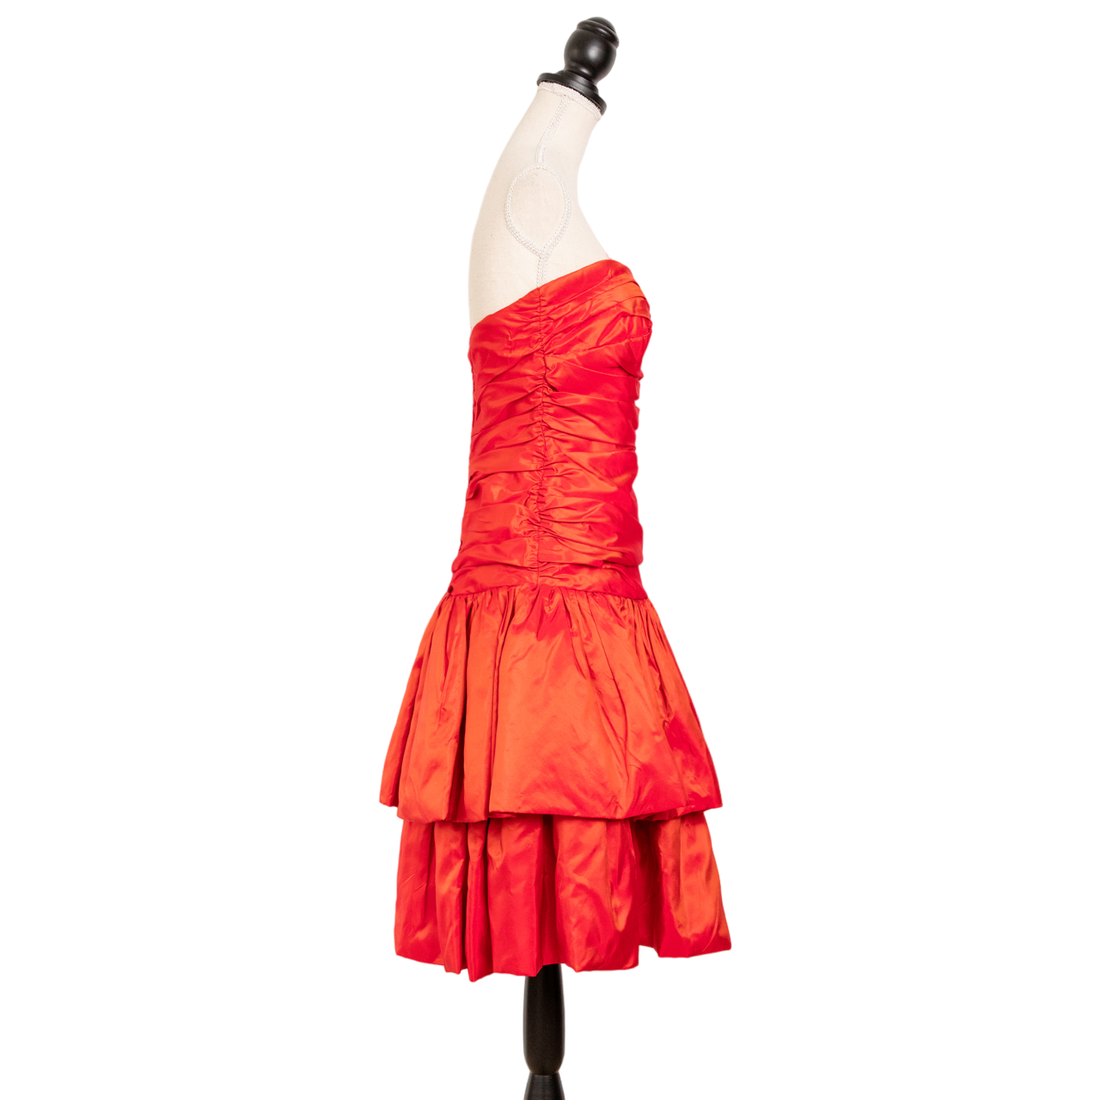 Peter Keppler cocktail dress with matching stole